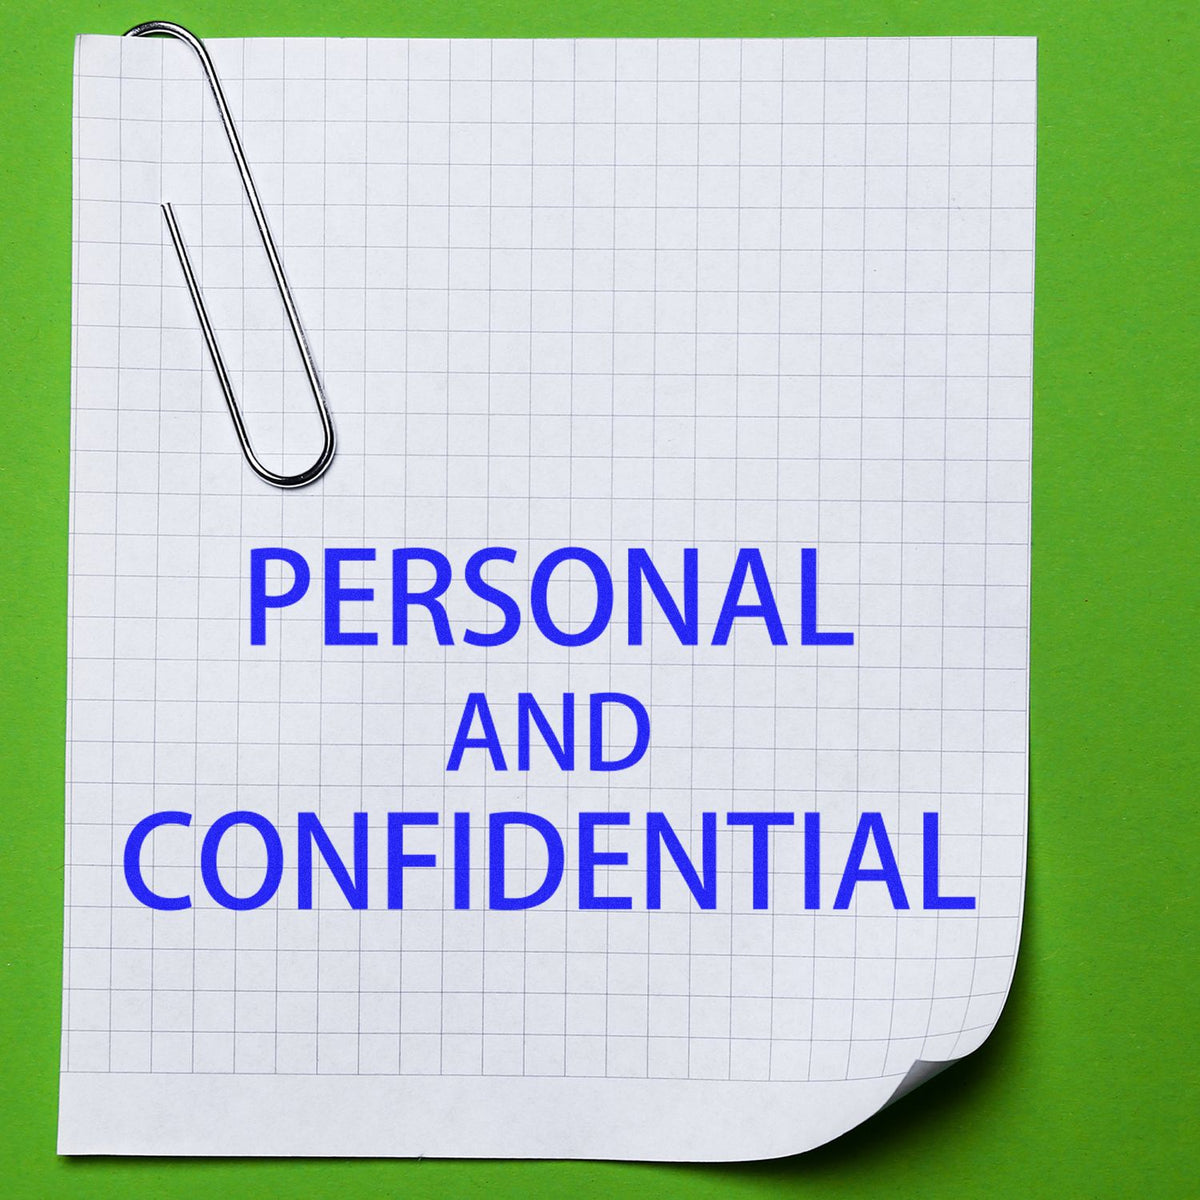 Personal Confidential Rubber Stamp In Use Photo